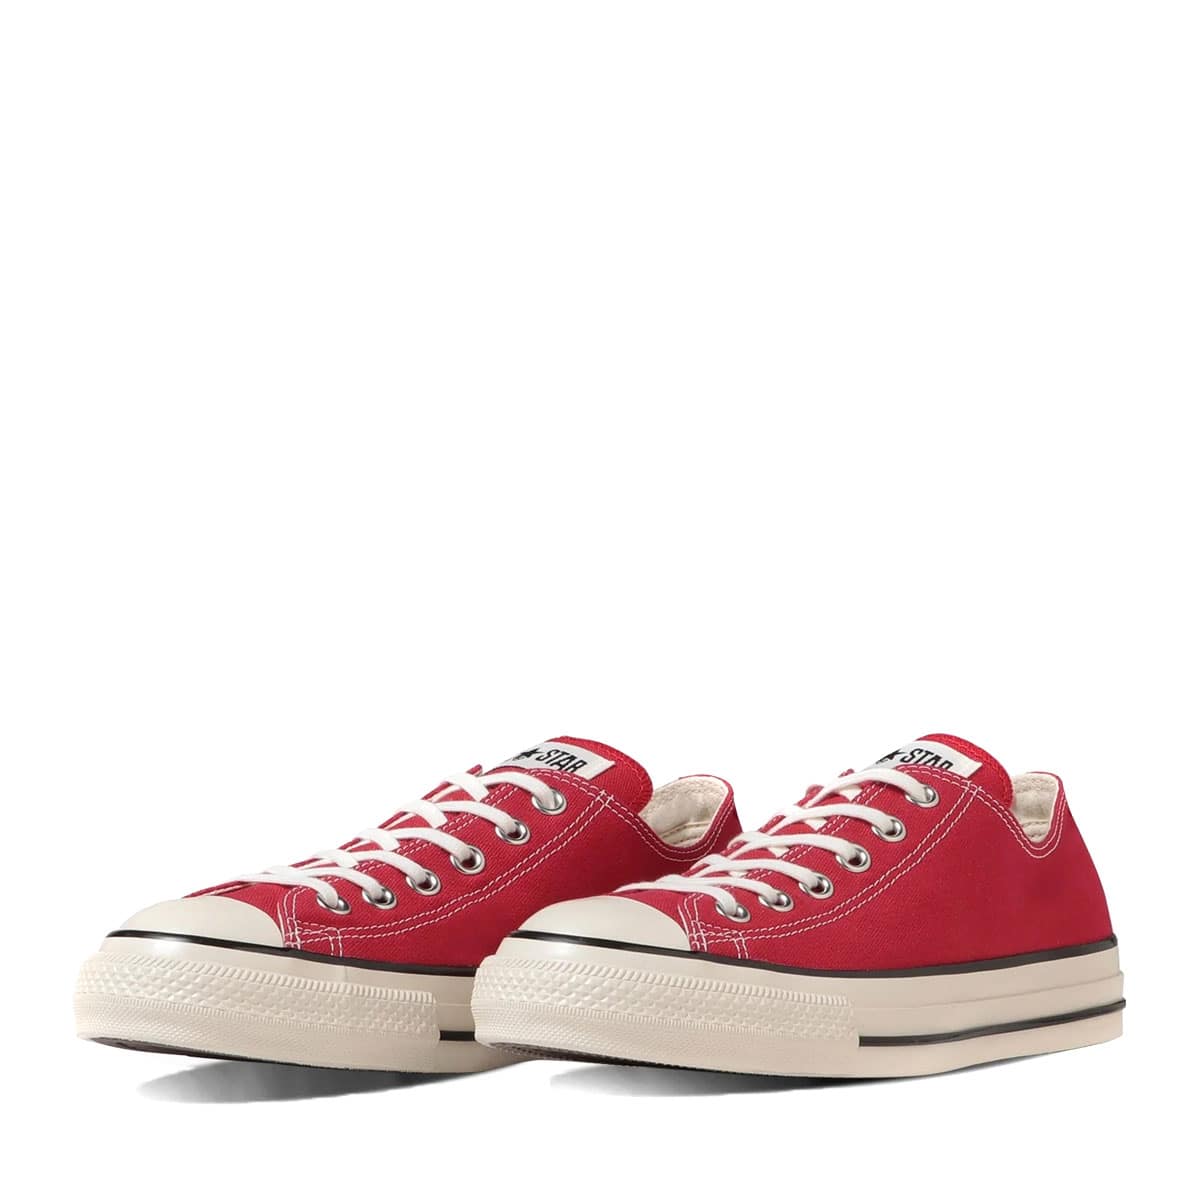 CONVERSE ALL STAR US OX CLASSIC RED 23SS-I